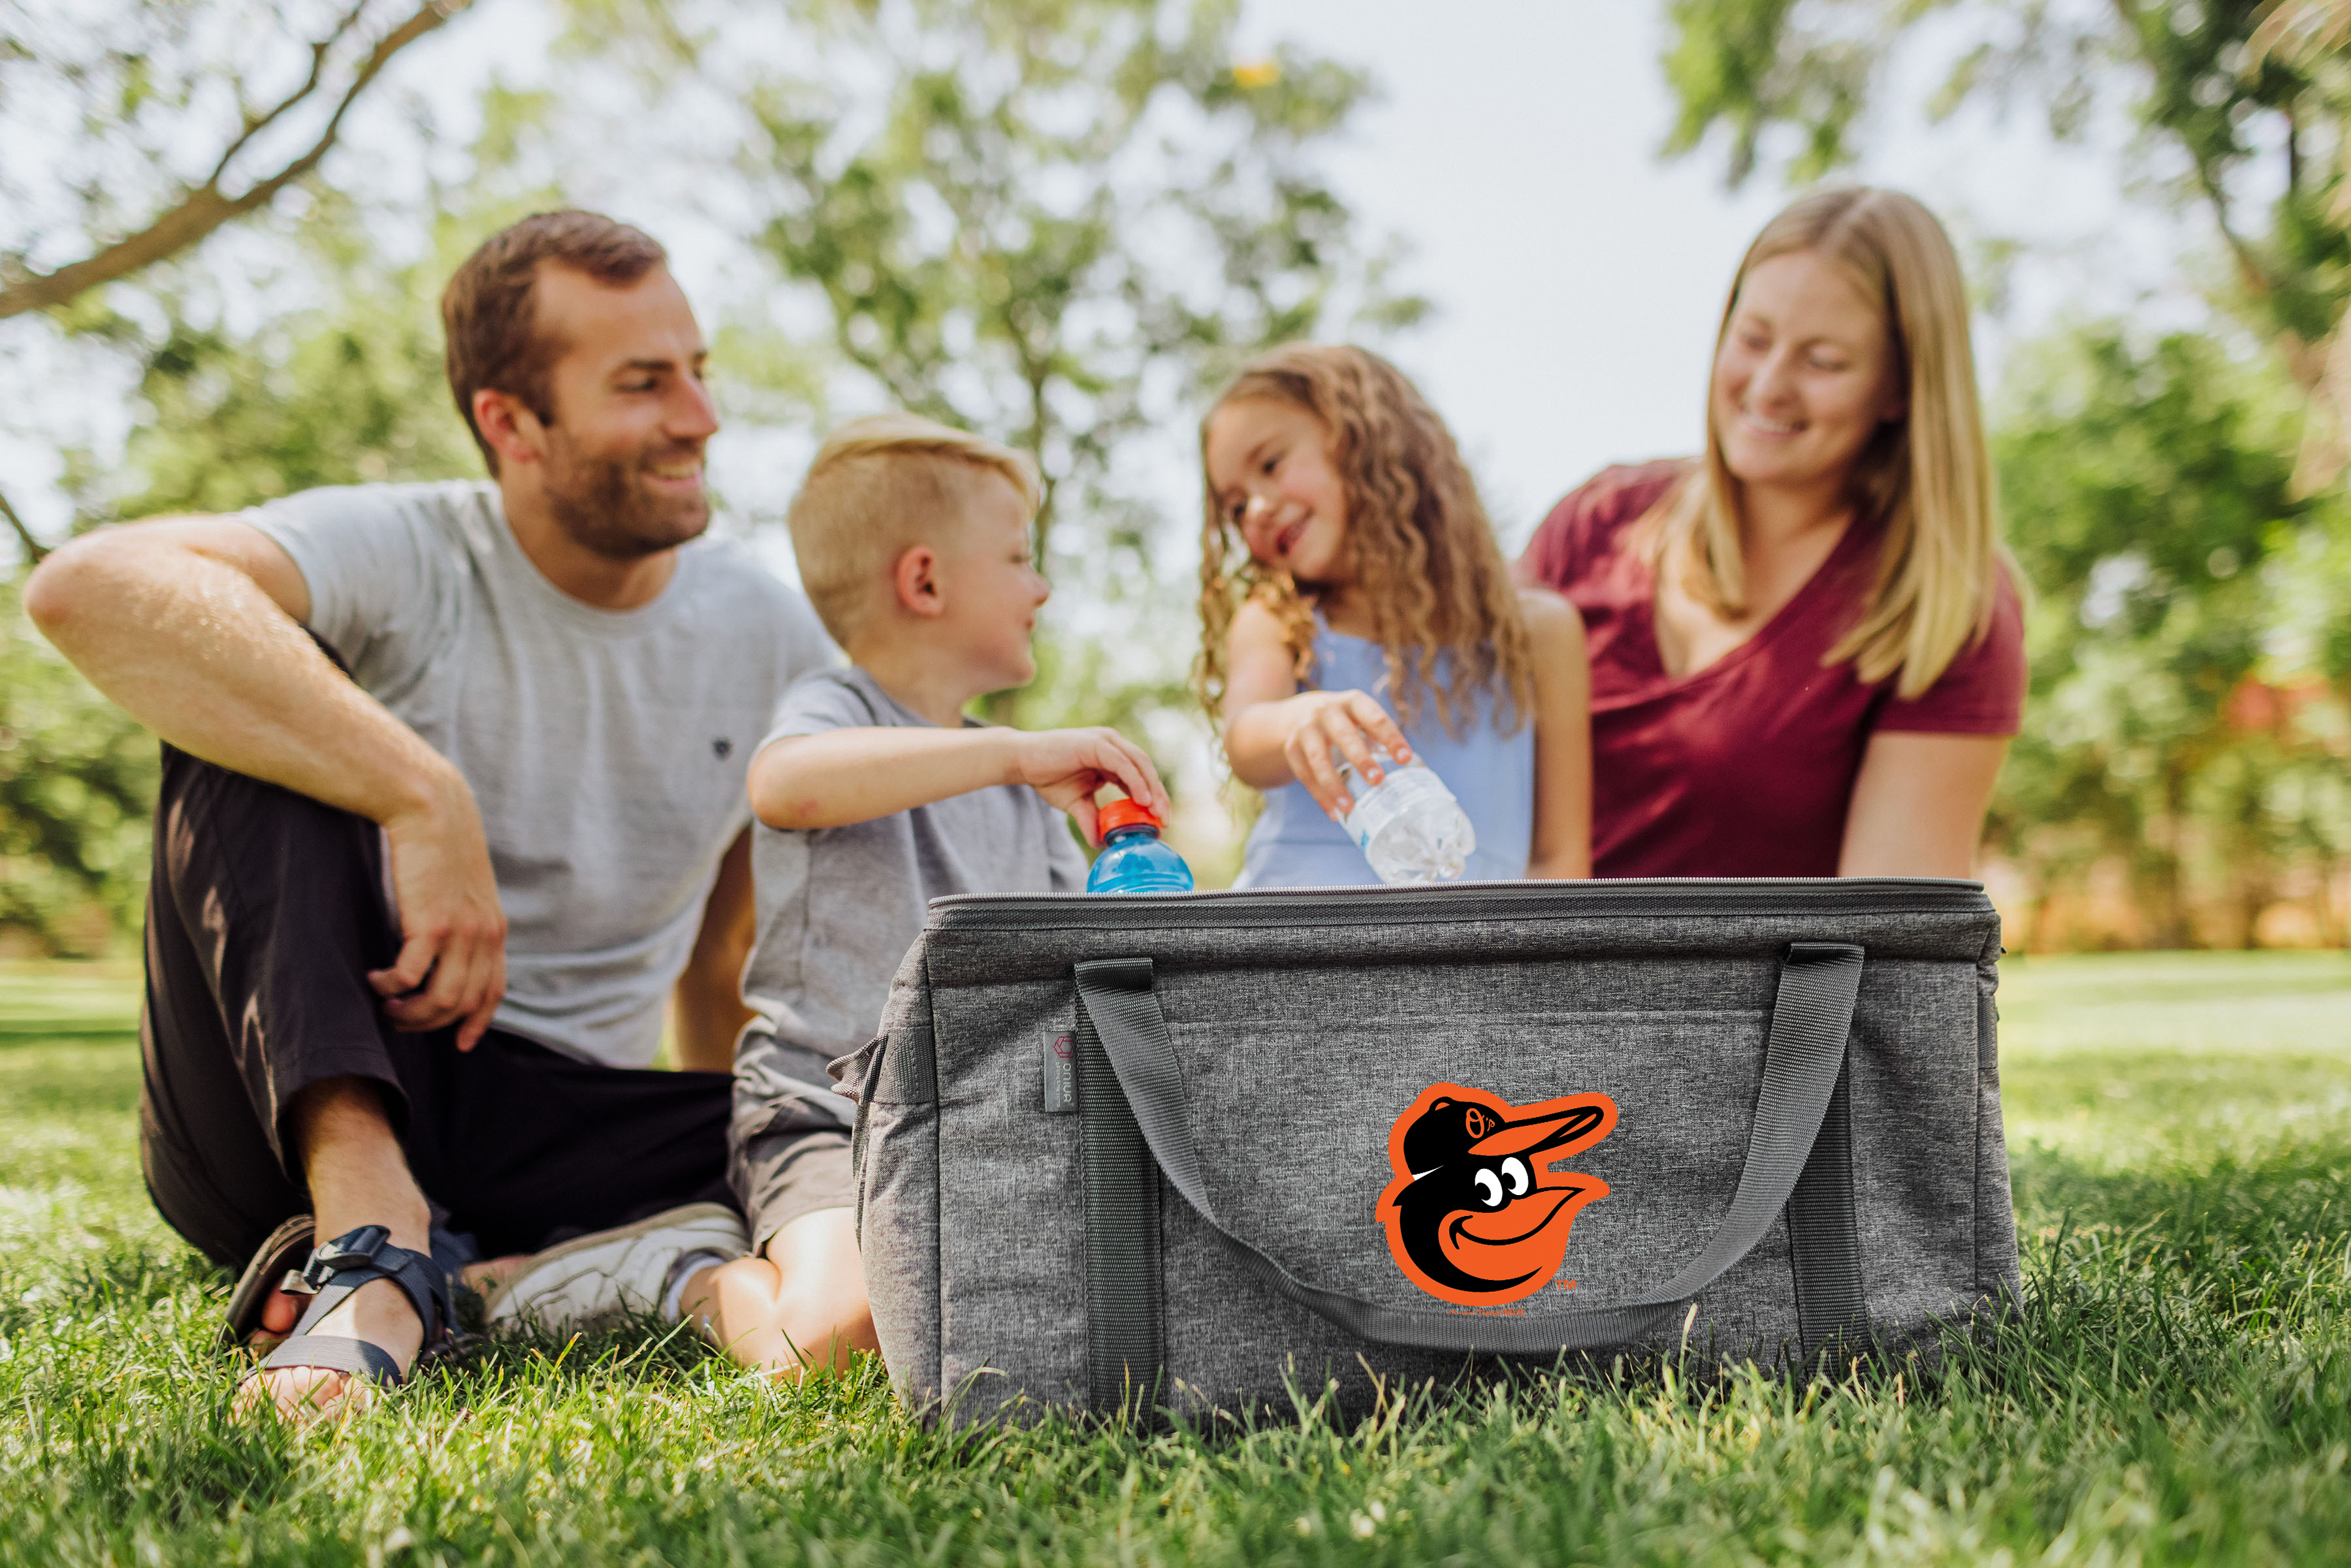 Baltimore Orioles - 64 Can Collapsible Cooler